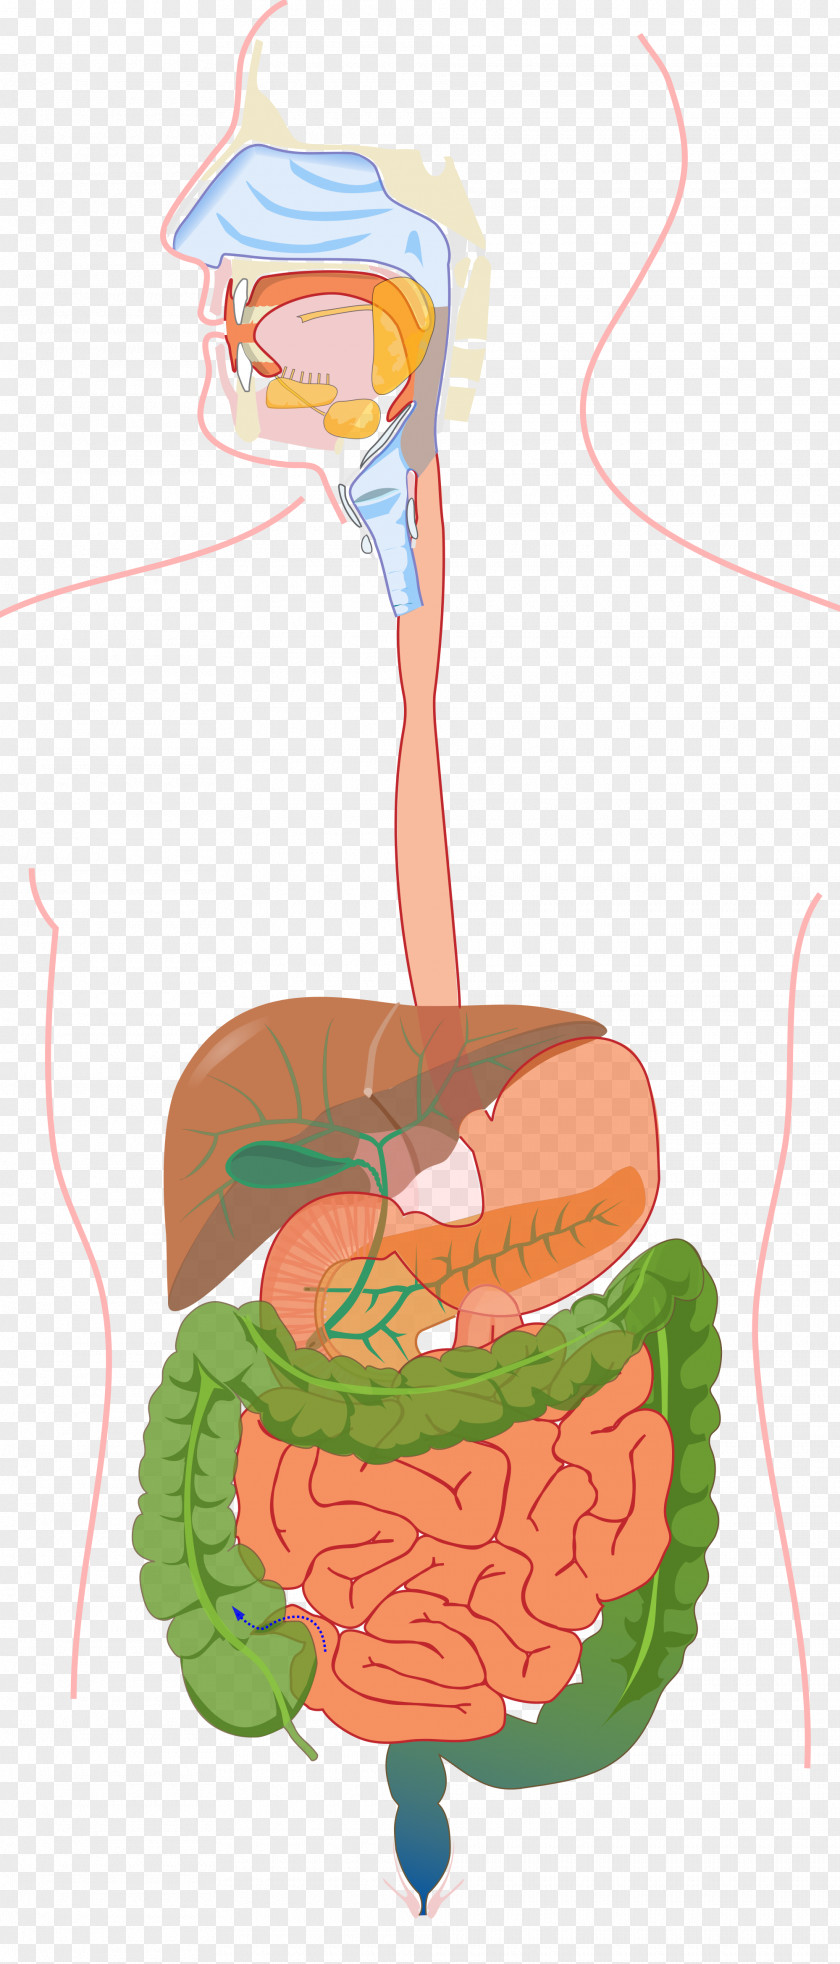 Gastrointestinal Tract Human Digestive System Digestion Endocrine Organ PNG tract digestive system system, organ, clipart PNG